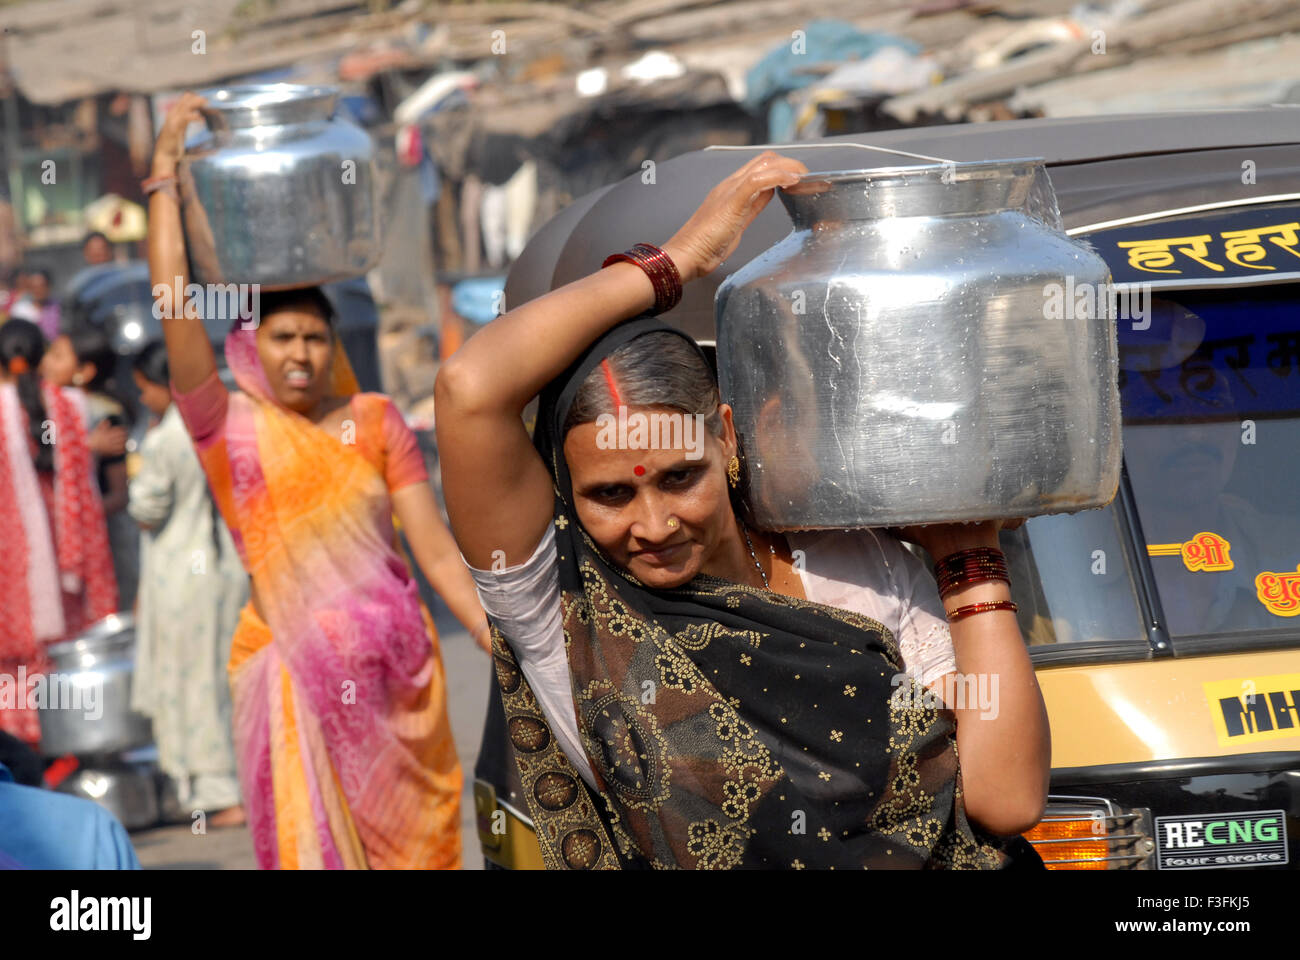 Women carry drinking water in aluminum containers on their heads at a slum in Chembur ; Bombay now Mumbai ; Maharashtra ; India Stock Photo